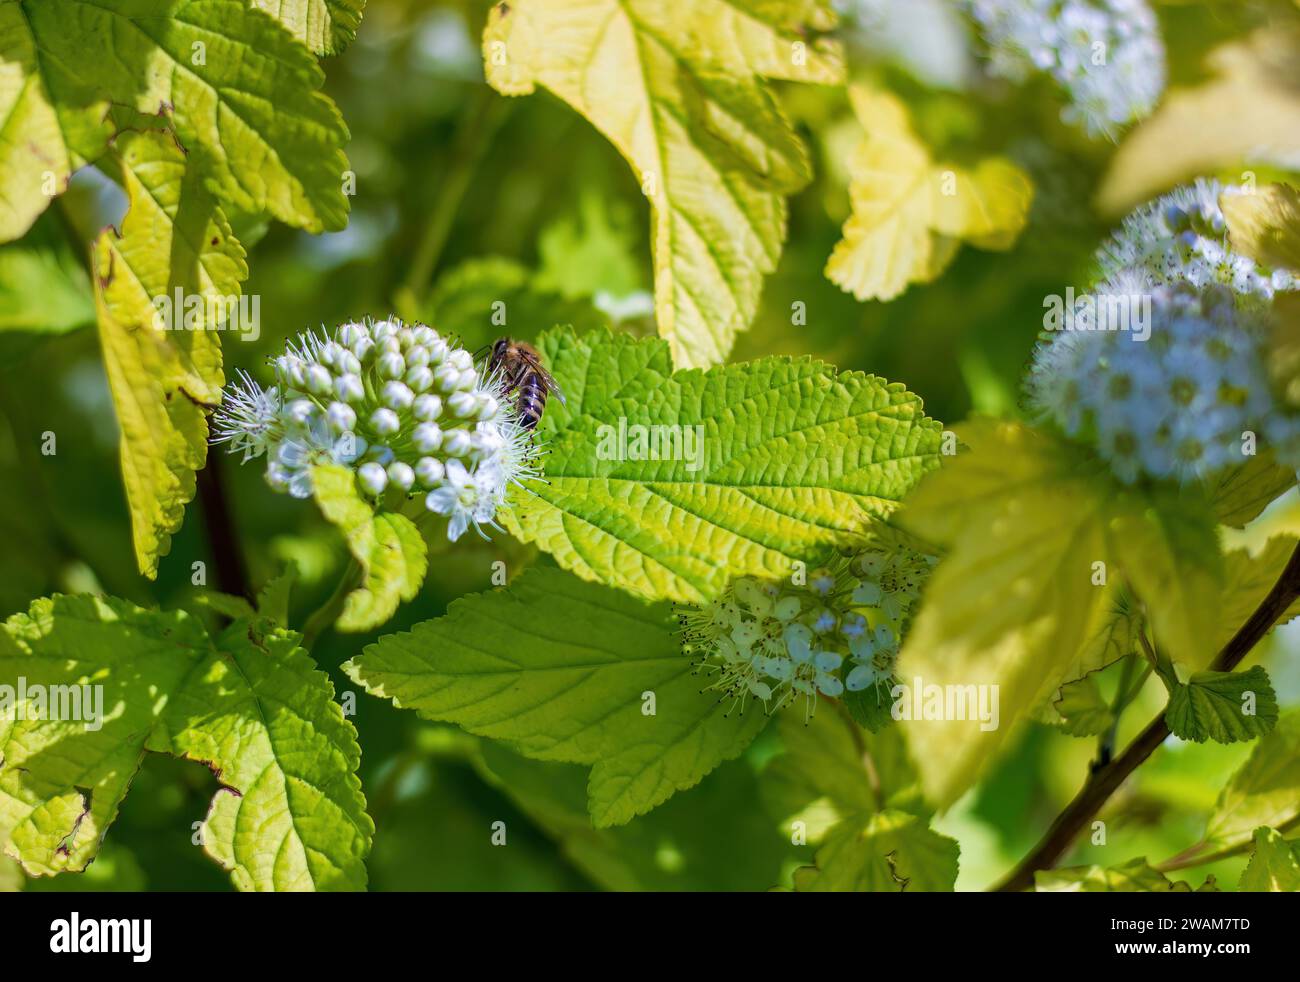 Bumble bee on Spiraea chamaedryfolia flowers in park outdoors in Europe Stock Photo